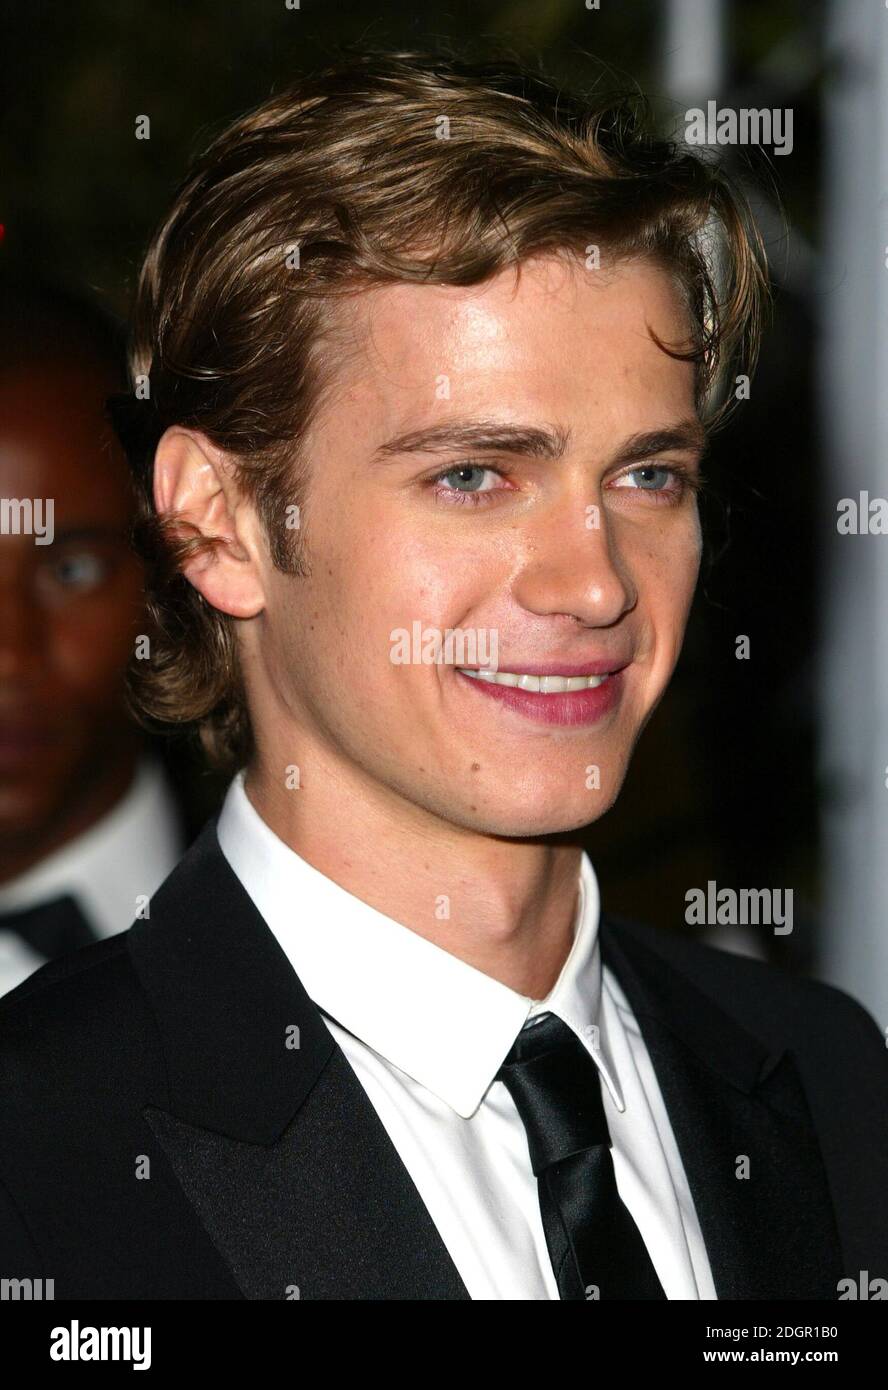 Hayden Christensen arriving at the Star Wars, Revenge of the Sith party, held at Le Baoli. Part of the 58th Festival De Cannes. Doug Peters/allactiondigital.com  Stock Photo